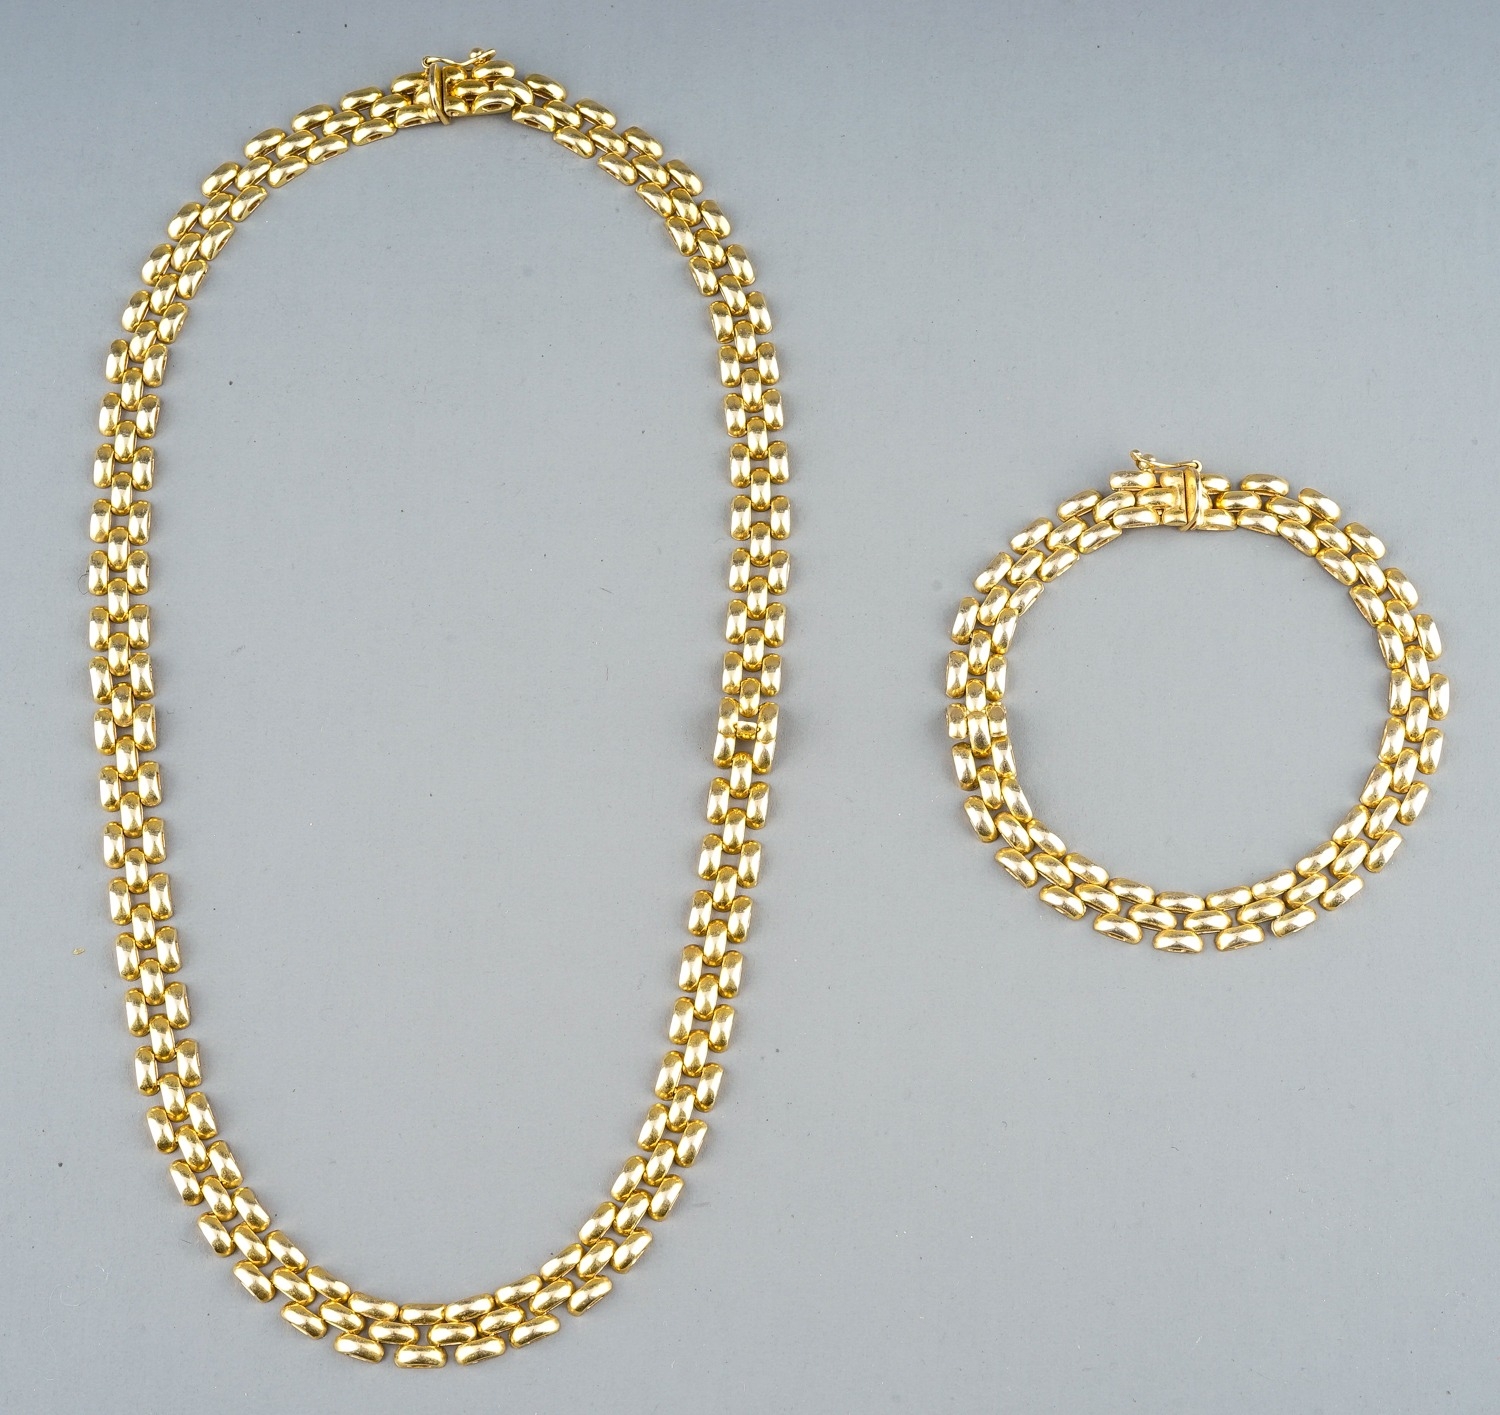 An Italian 9k yellow gold gate-link necklace and bracelet, the necklace approx 41cm long, gross - Image 3 of 10